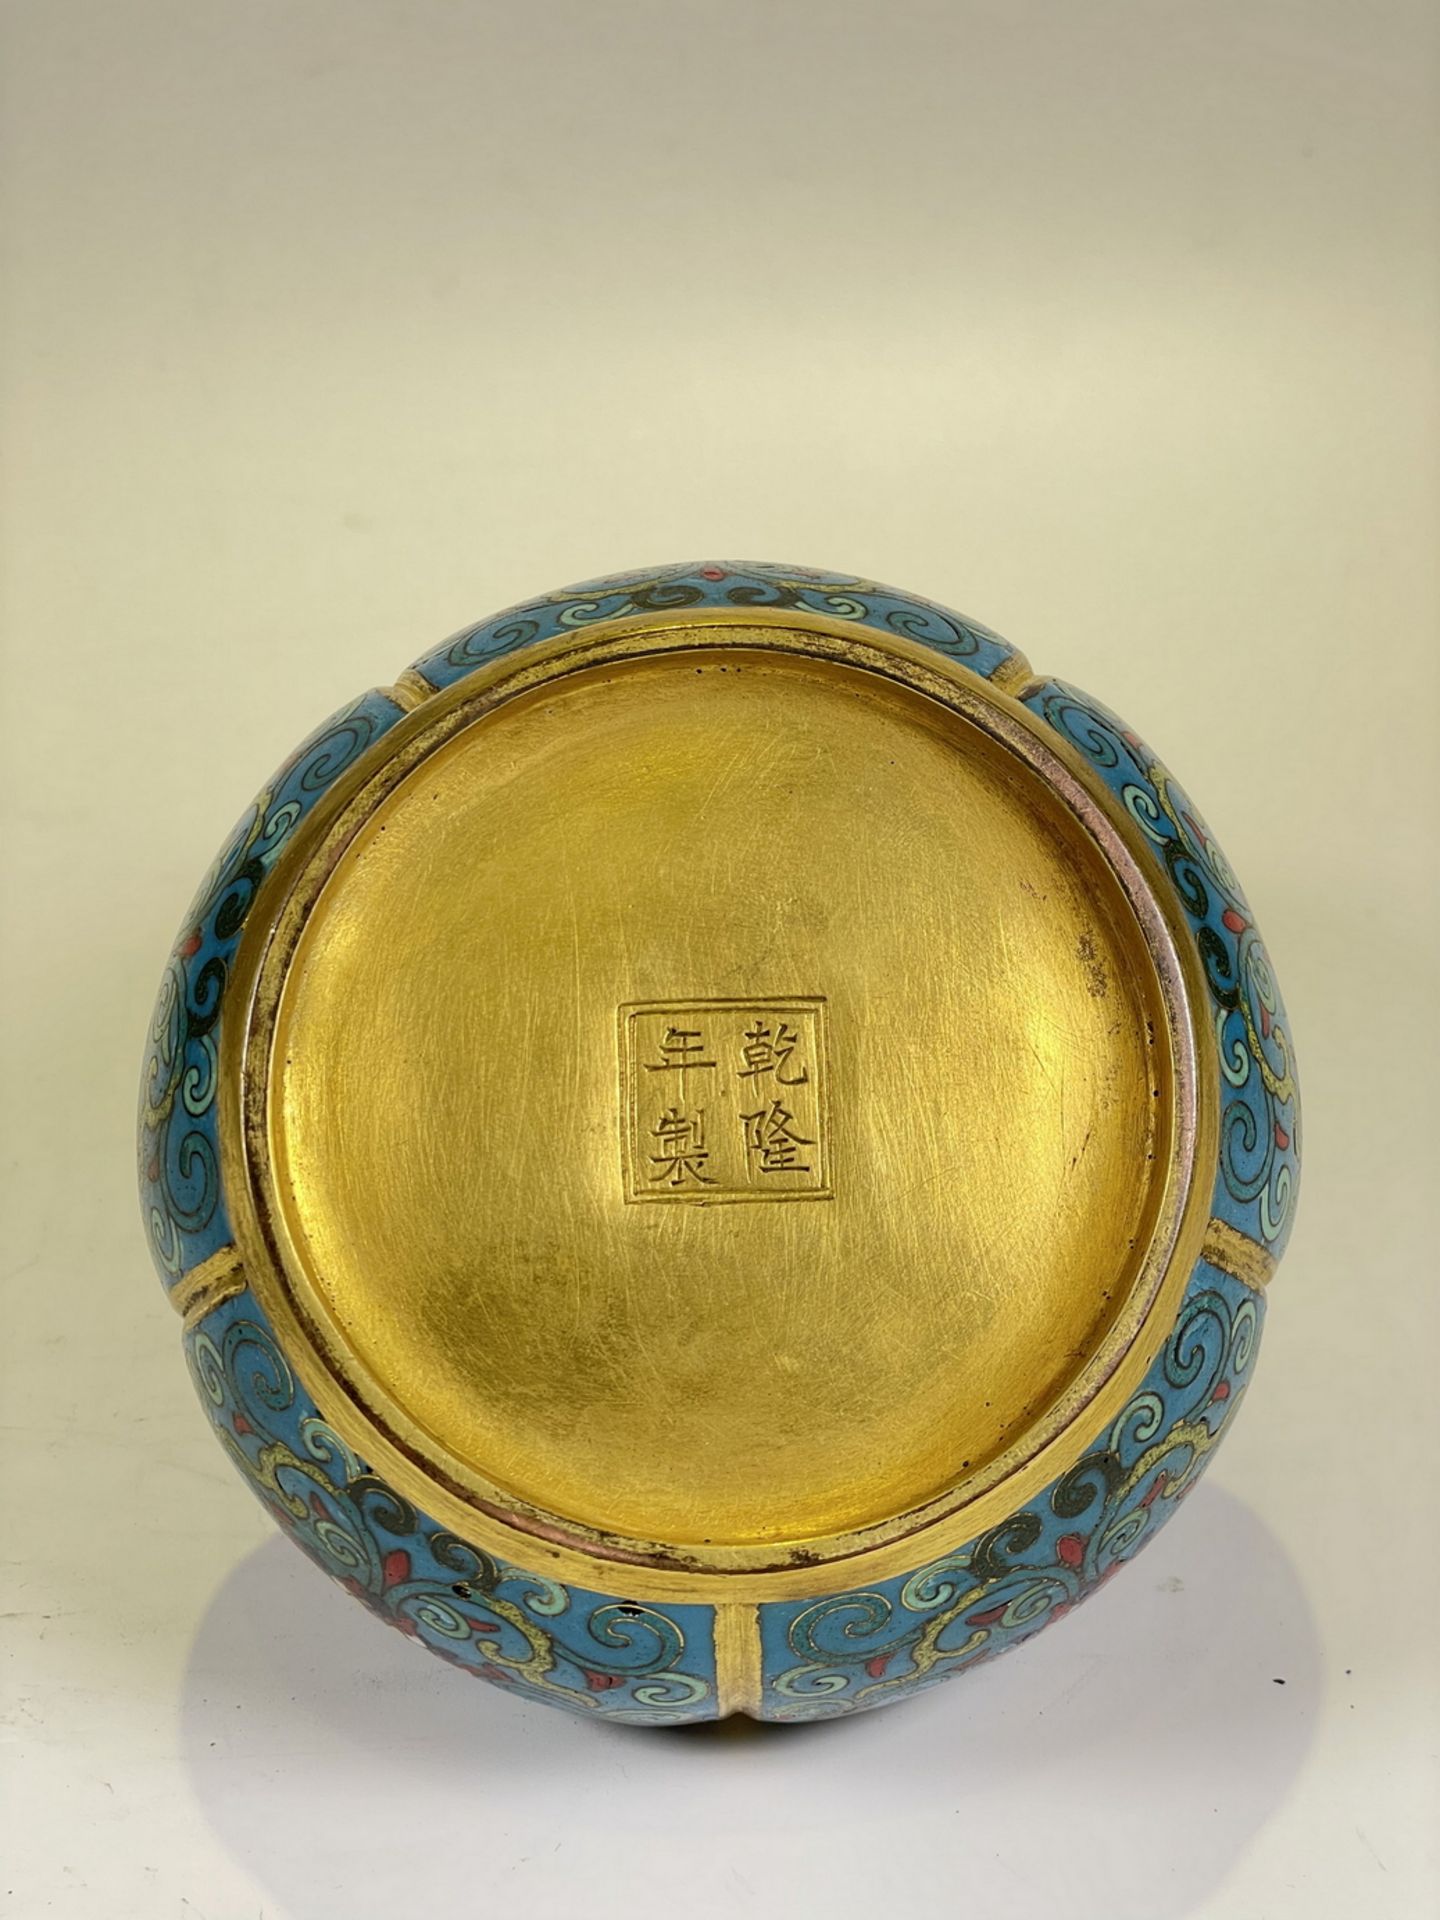 FINE CHINESE CLOISONNE, 18TH/19TH Century Pr. Collection of NARA private gallary.  - Image 4 of 6